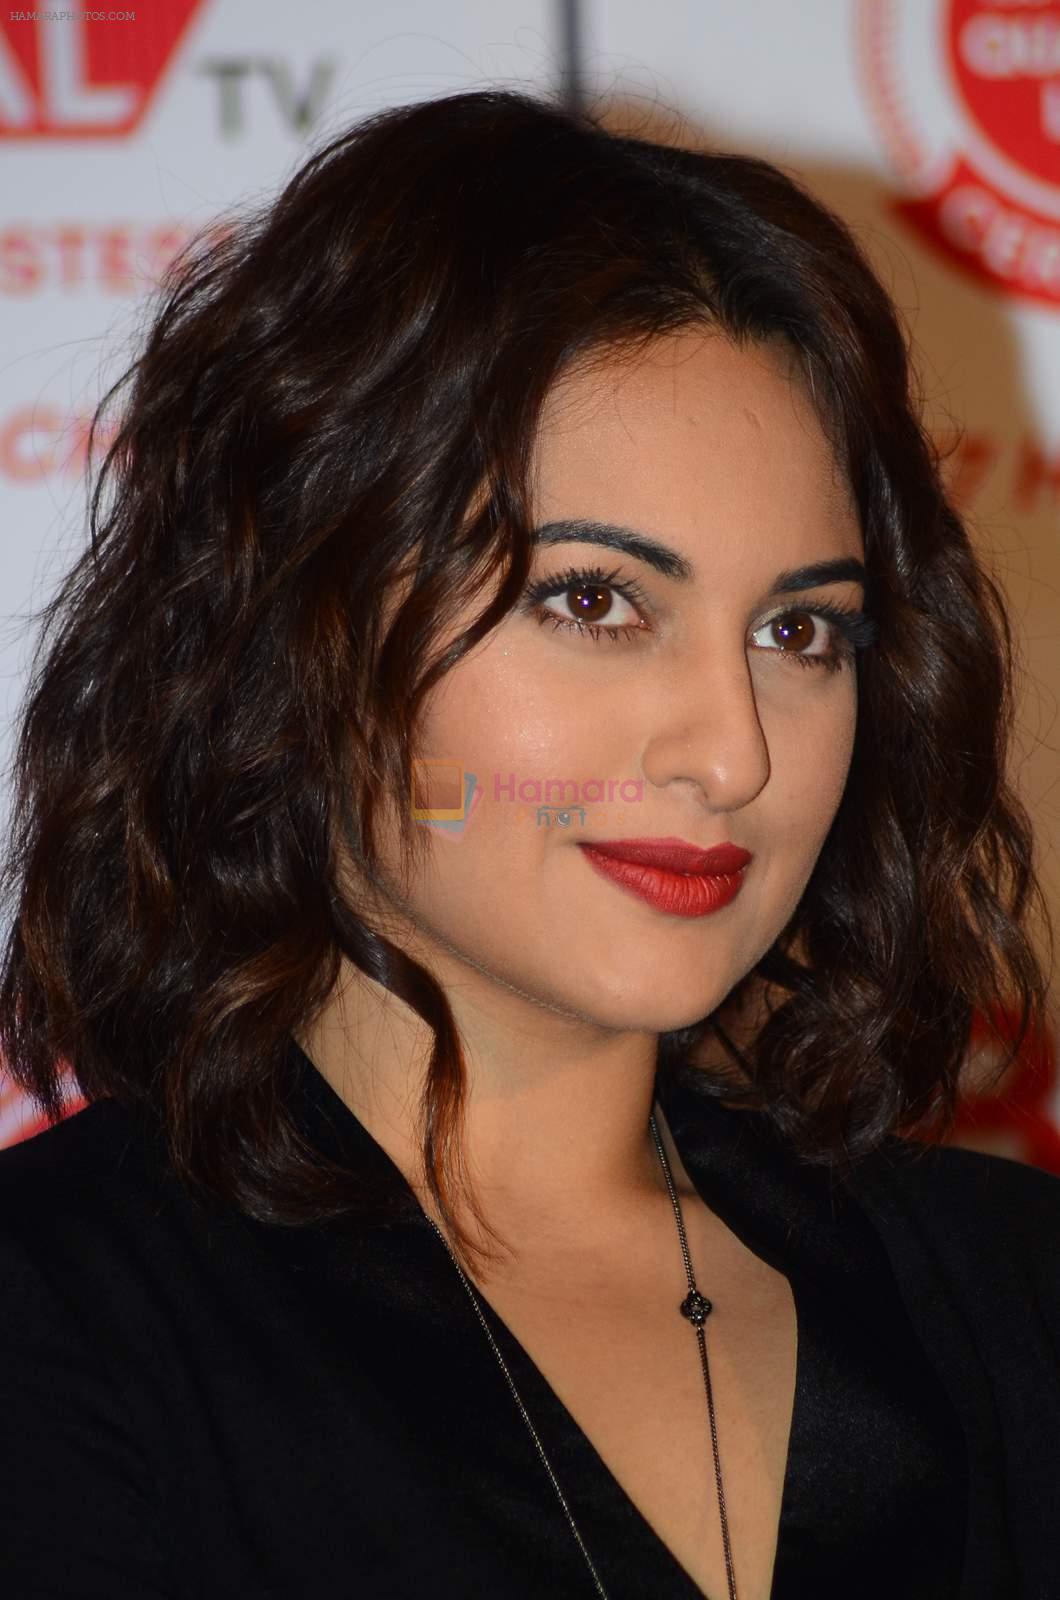 Sonakshi Sinha at Shilpa's new home shop venture in PVR on 5th March 2015